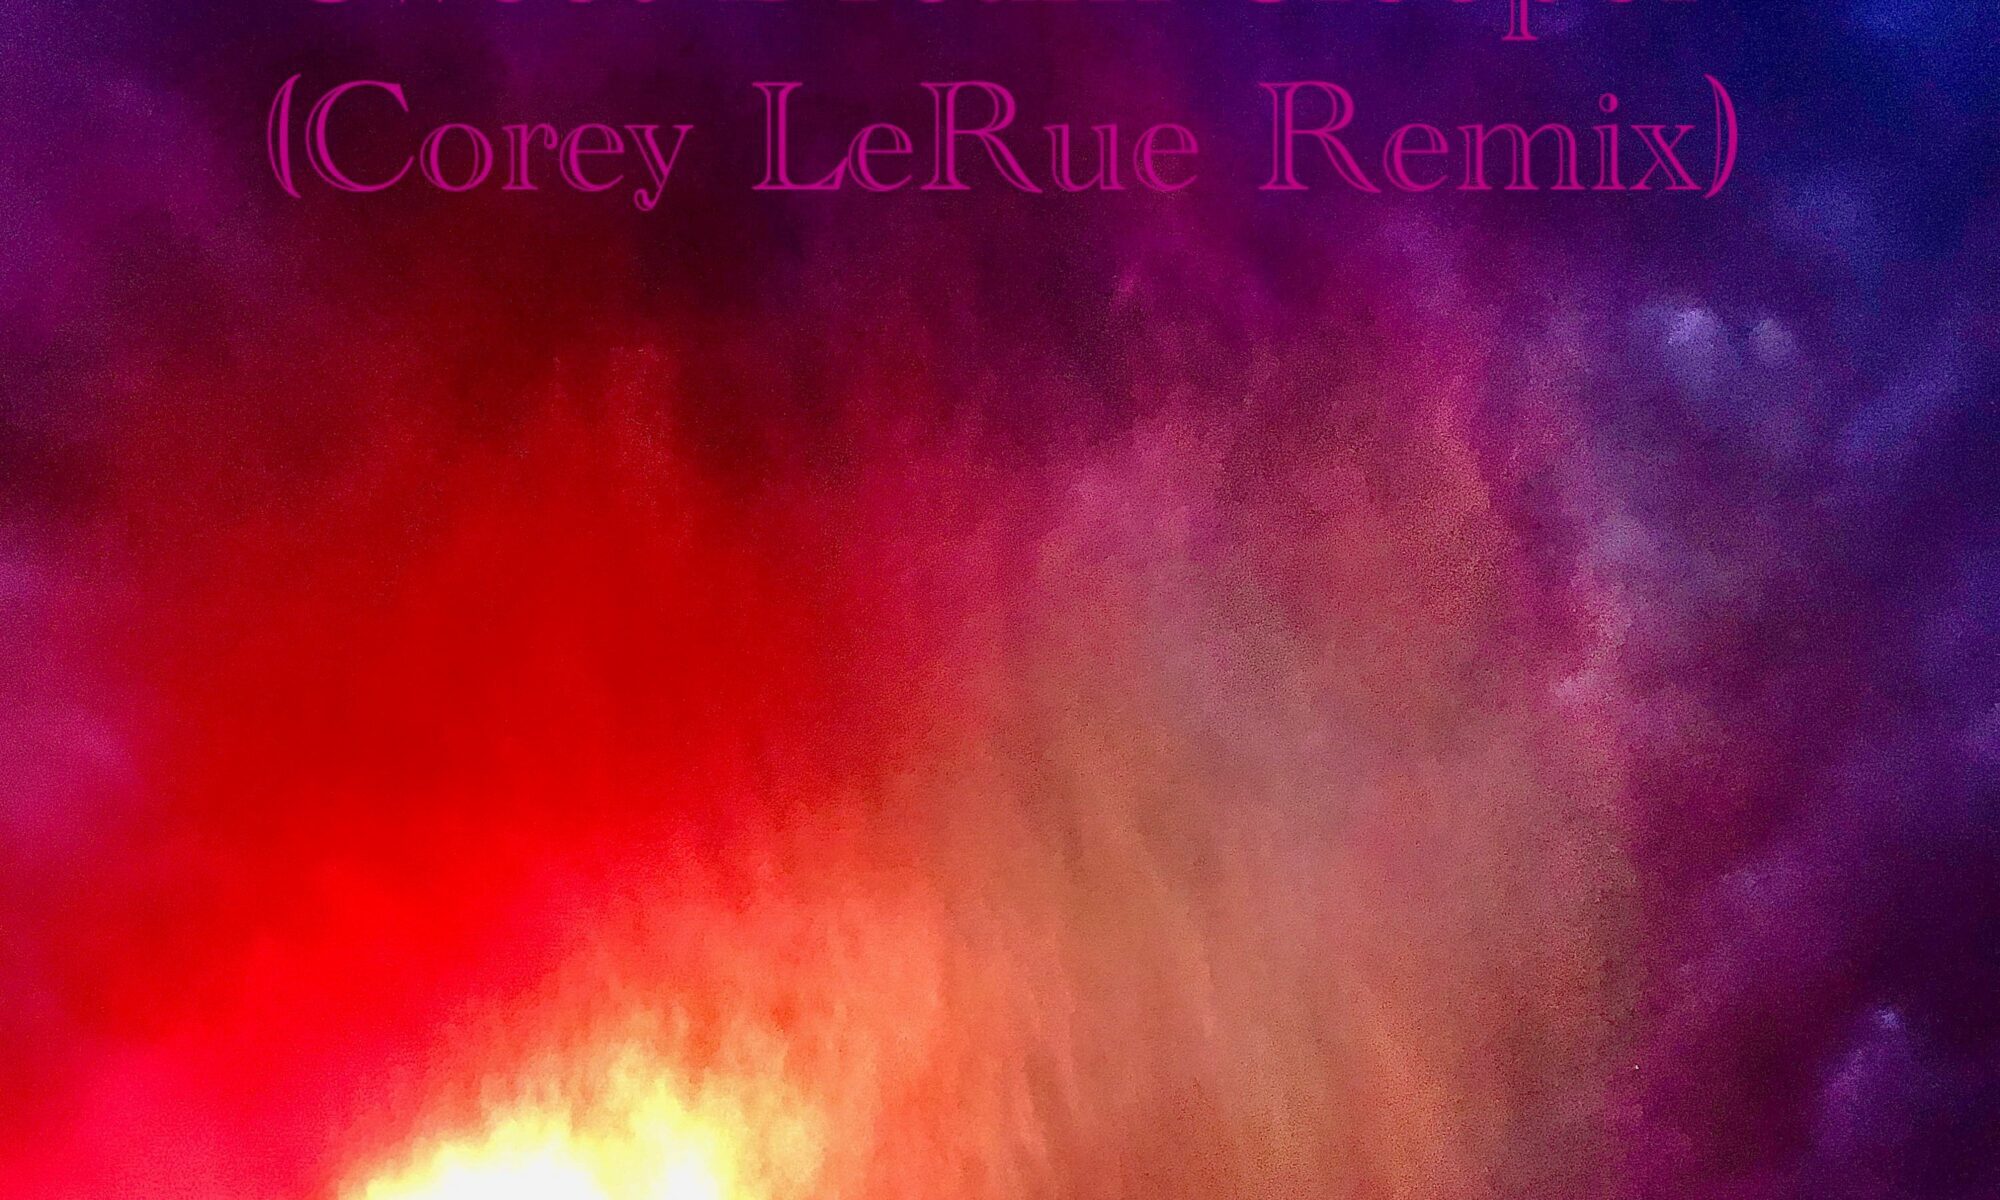 Sweet Dream Sleeper Corey LeRue Remix by Don Brownrigg single cover showing a lit up sky and the top of an old style lamppost